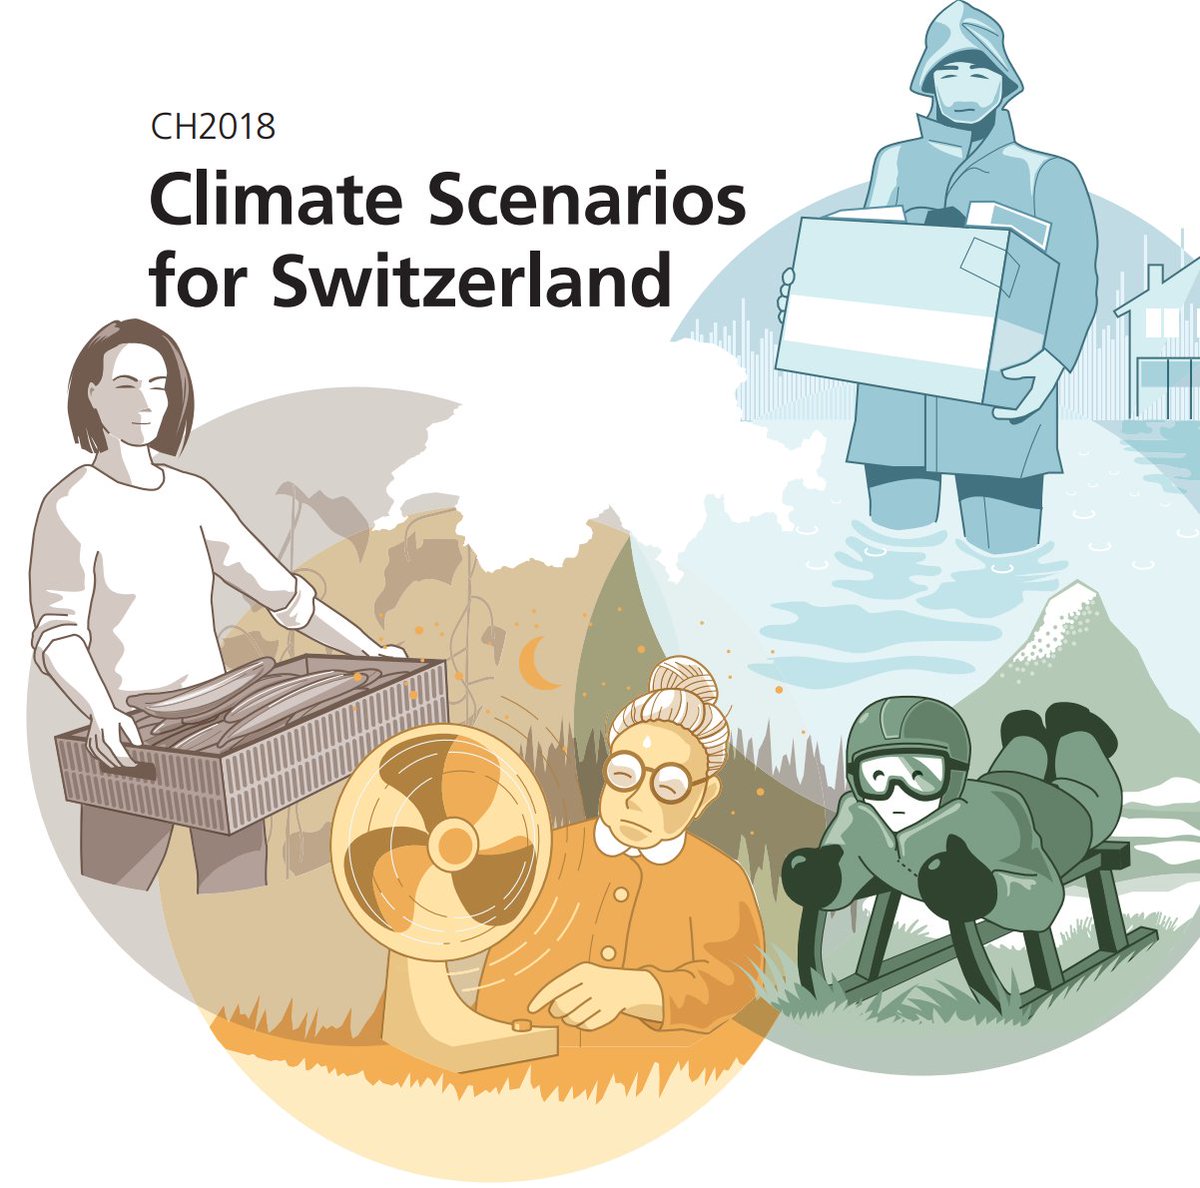 Want to work with us on the next set of climate scenarios, on impacts of climate change and extremes on energy and biodiversity? Data science/ML, uncertainty, emergent constraints and policy implications? We are hiring several (senior) postdocs! jobs.ethz.ch/job/view/JOPG_…